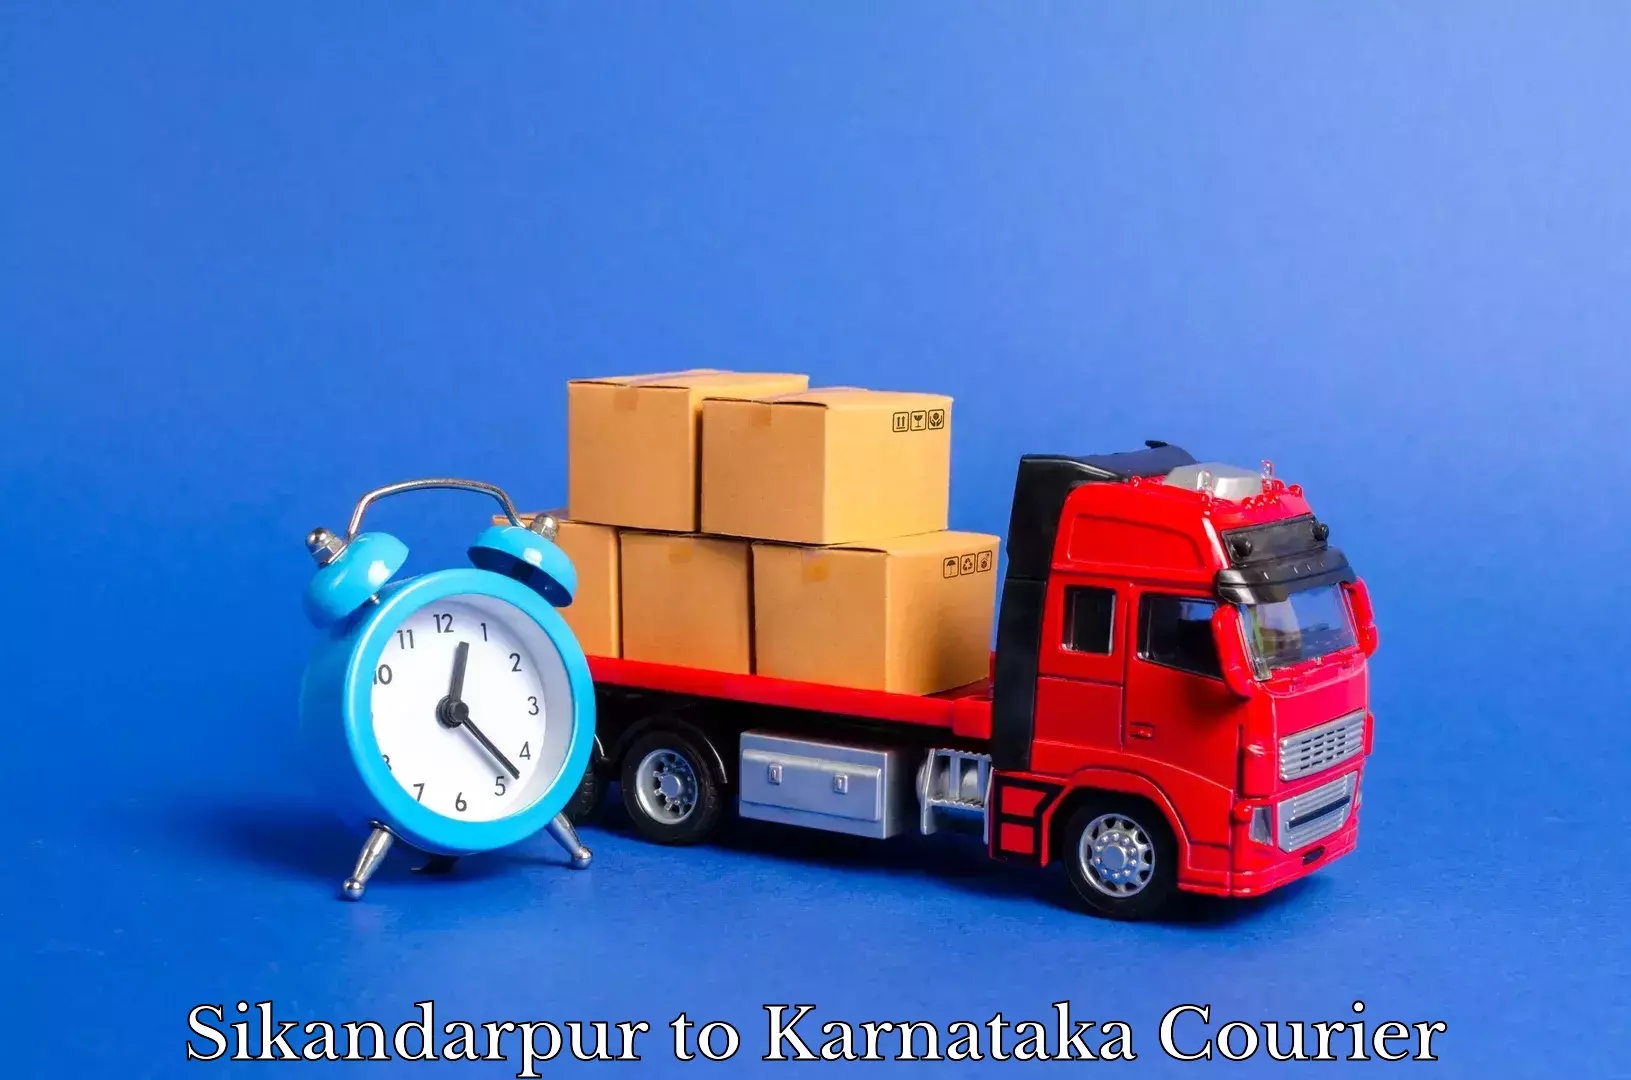 Quality relocation services in Sikandarpur to Huliyar